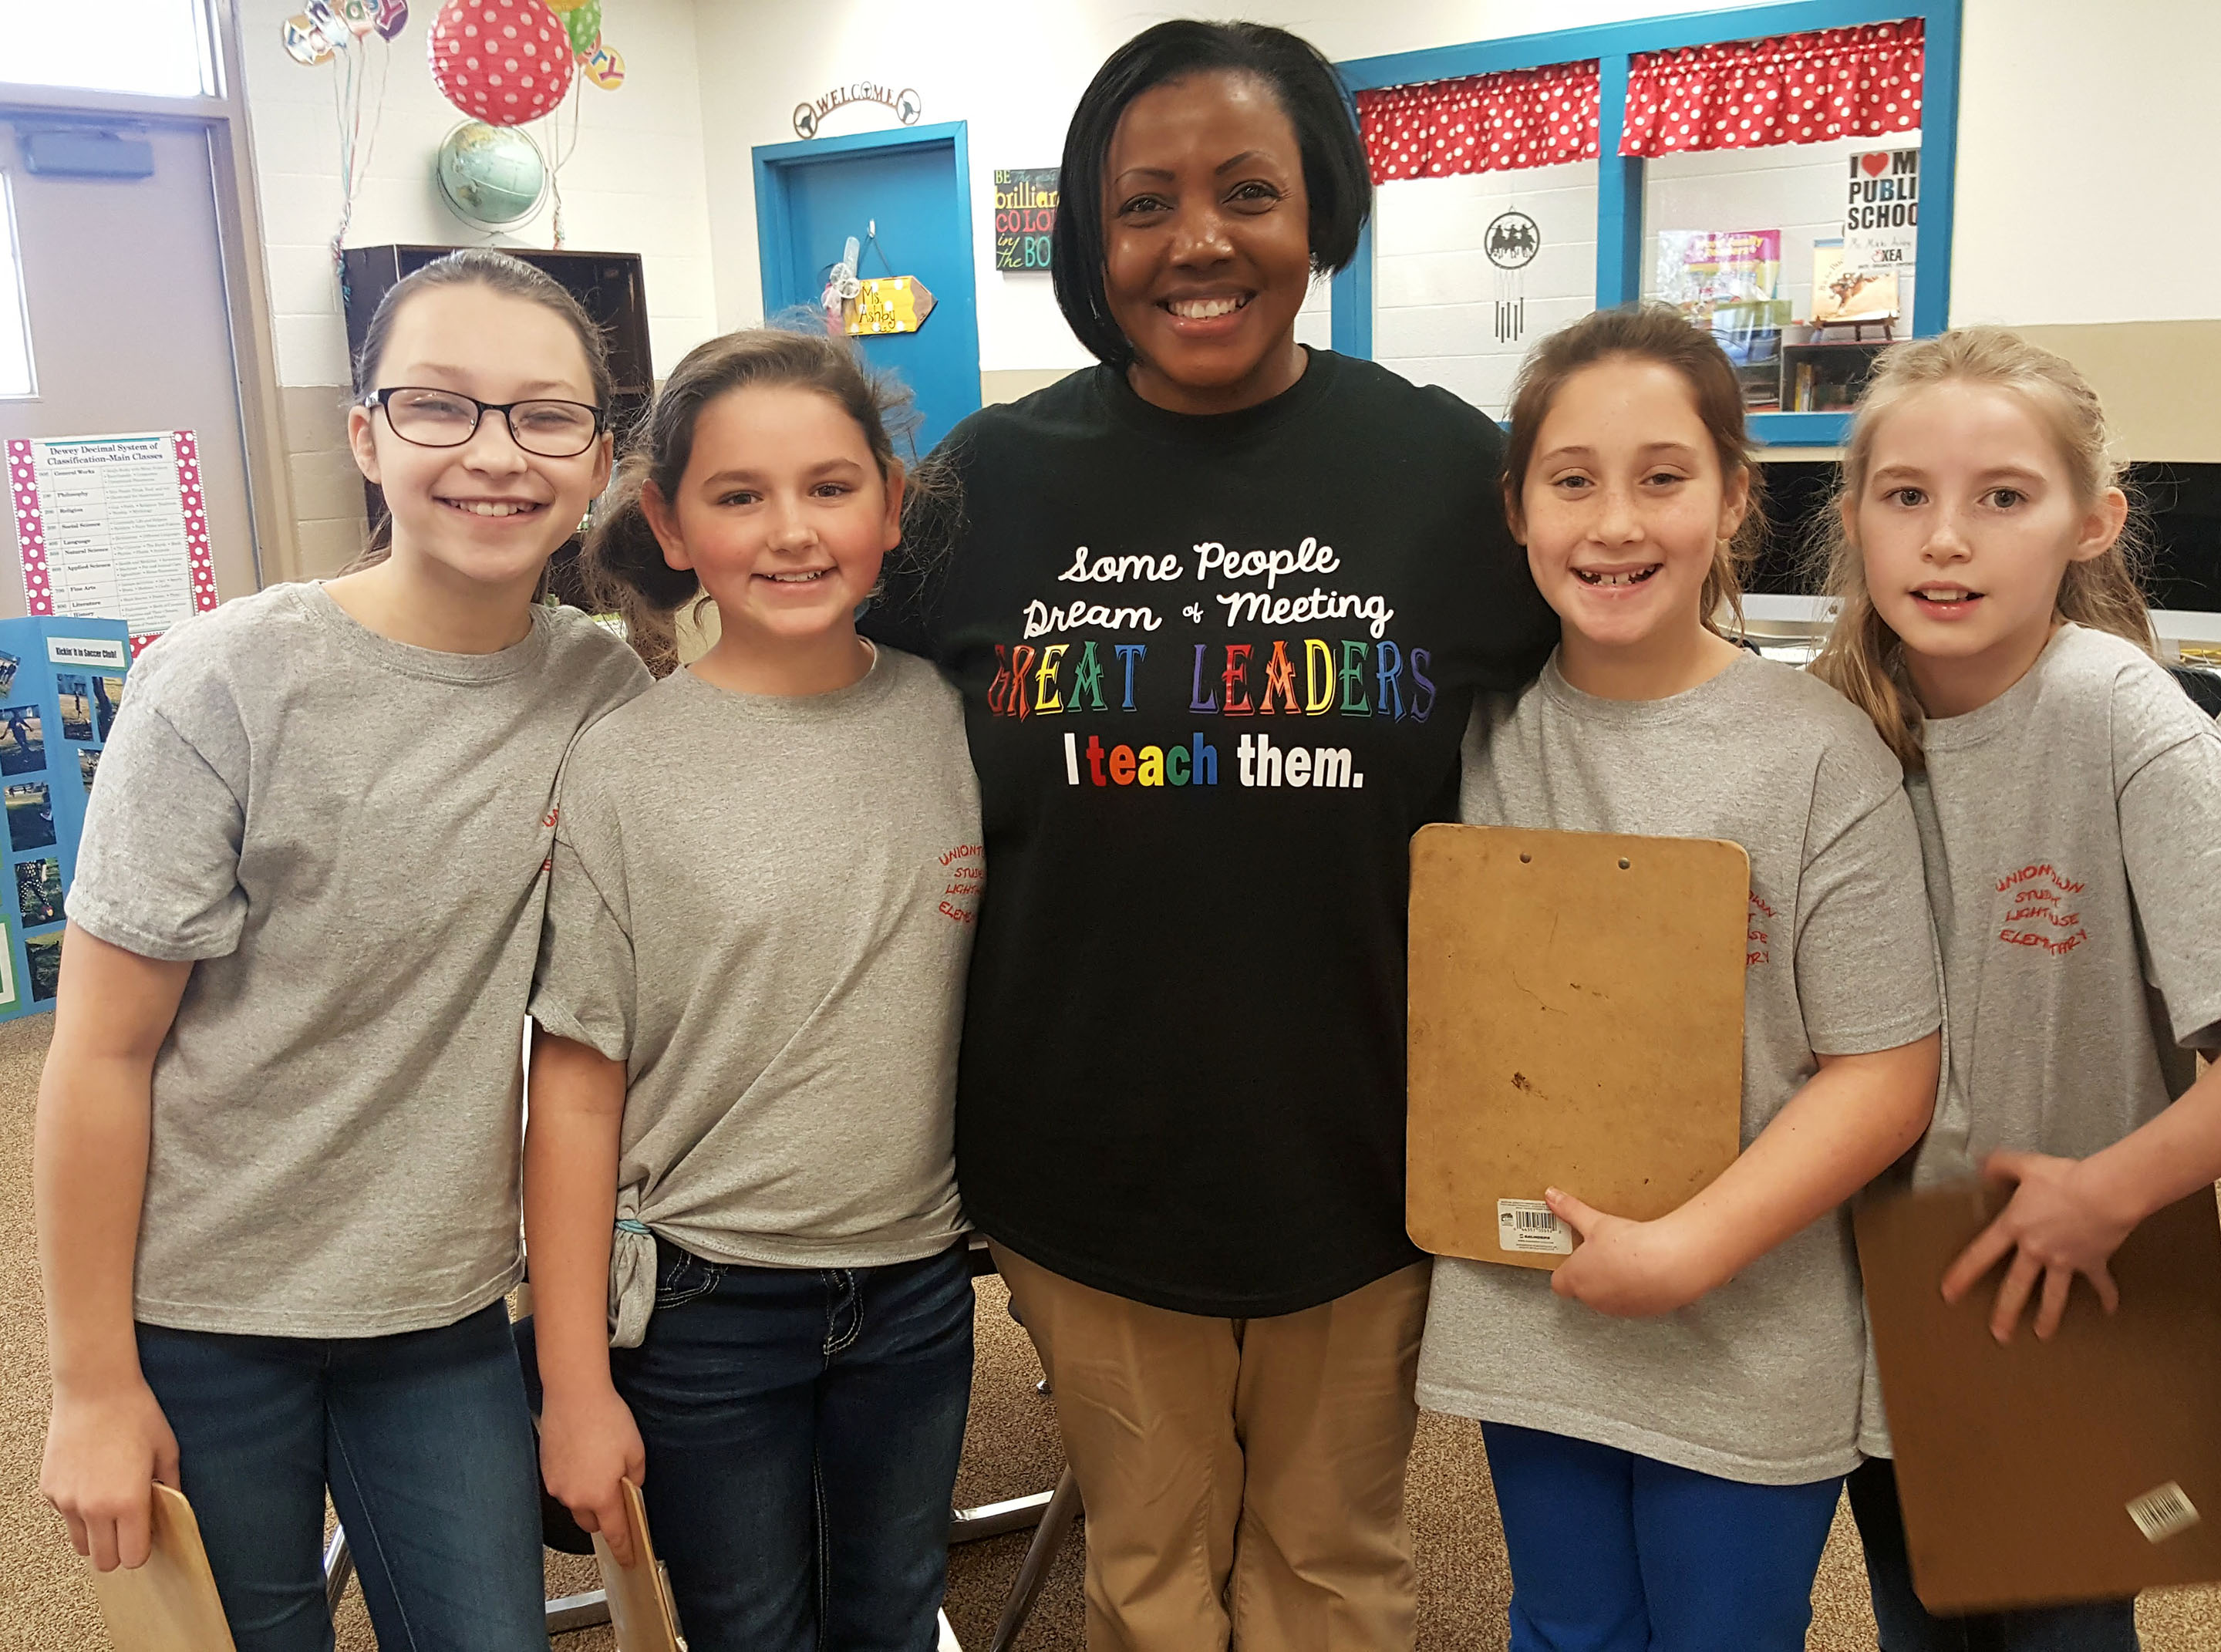 Principal Tamala Howard of Uniontown Elementary School (Union County) snaps a quick picture with 5th-grade students, from left, Evan Logsdon, Olivia Burke, Kaitlyn Thompson and Maggie Baird from the school's Leader in Me Student Lighthouse Team. Union County was one of 22 school districts to participate in kid·FRIENDLy – Kids Focused, Responsible, Imaginative, Engaged and Determined to Learn – funded by a $41 million Race-to-the-Top-District grant that focused on helping schools build personalized learning and discover ways to empower students. (Photo submitted)